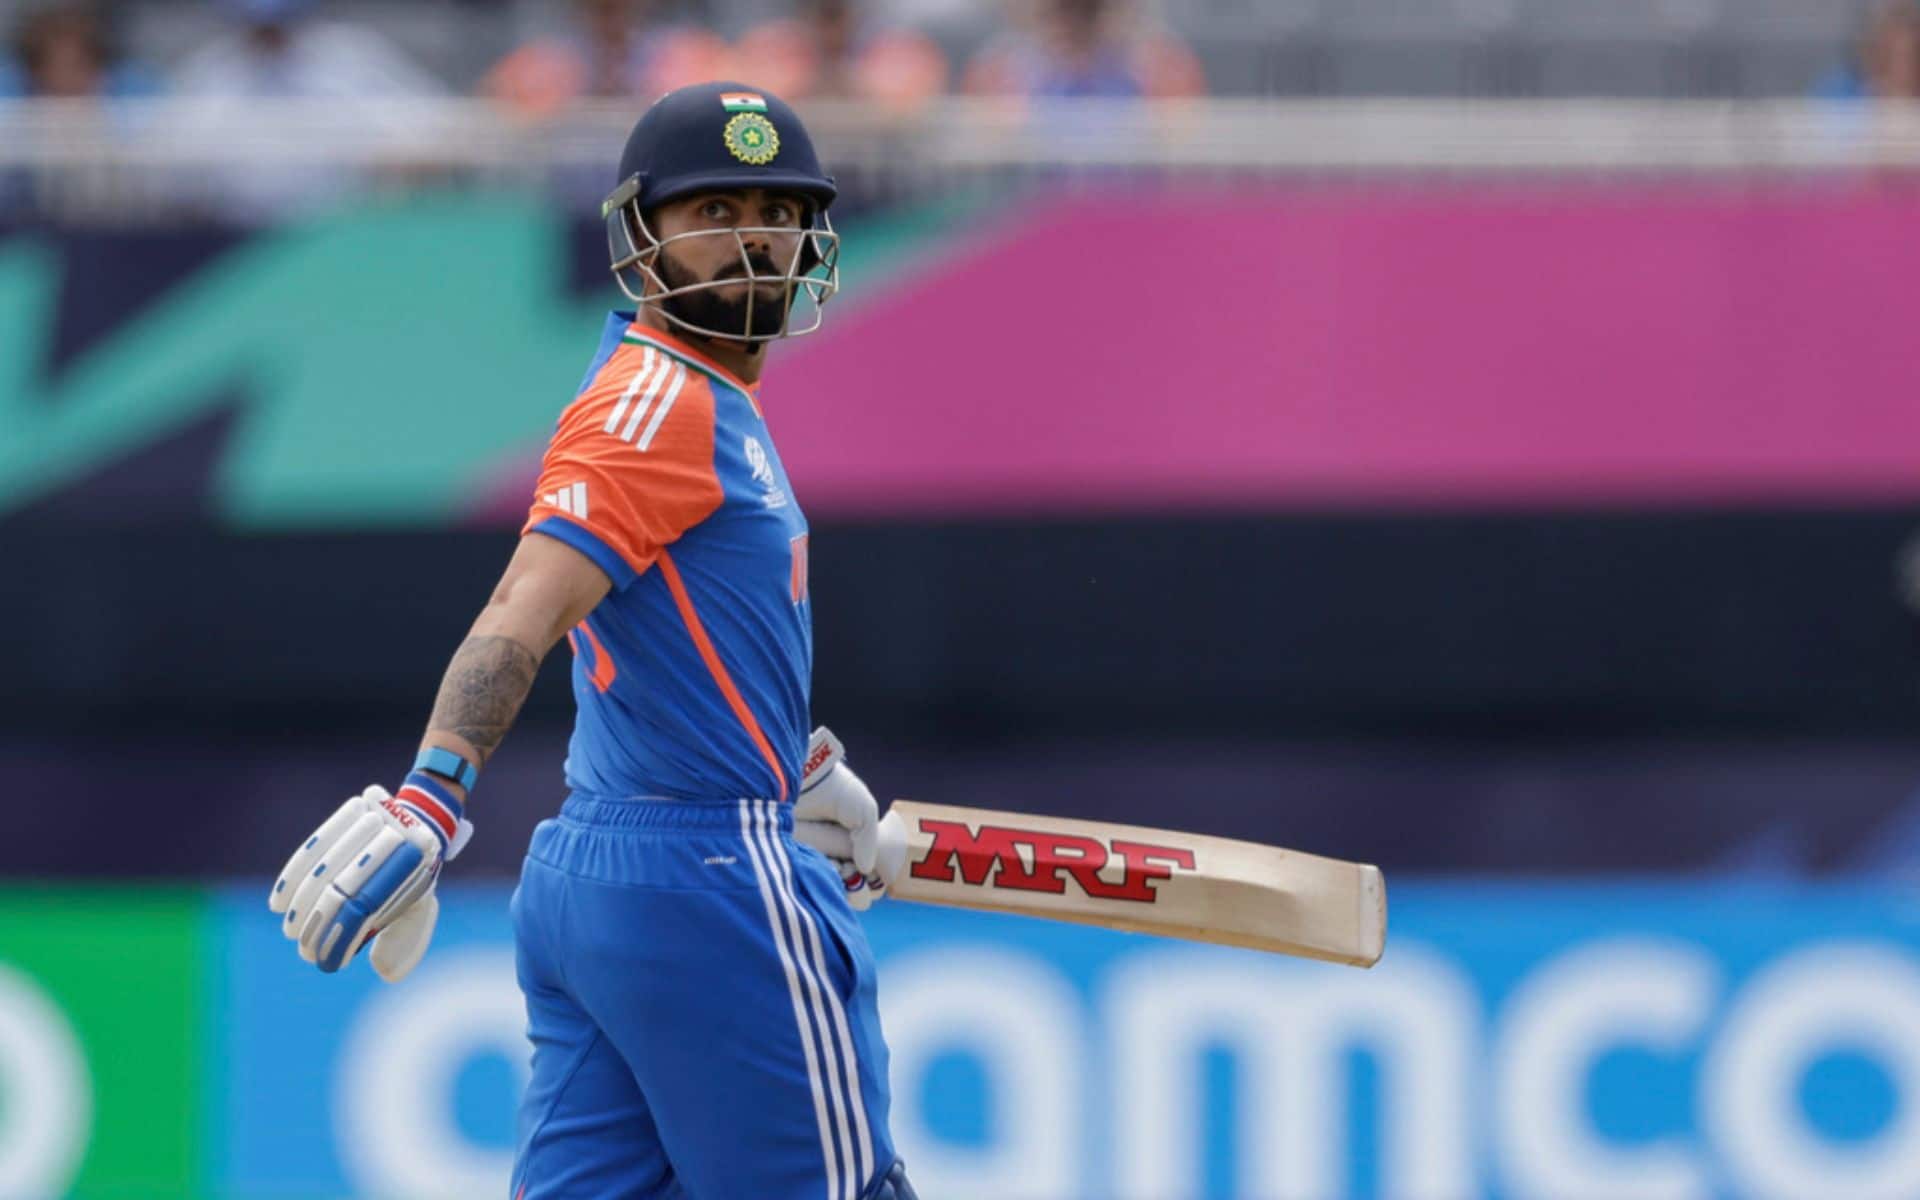 Virat Kohli has been horribly out of form in the T20 World Cup so far